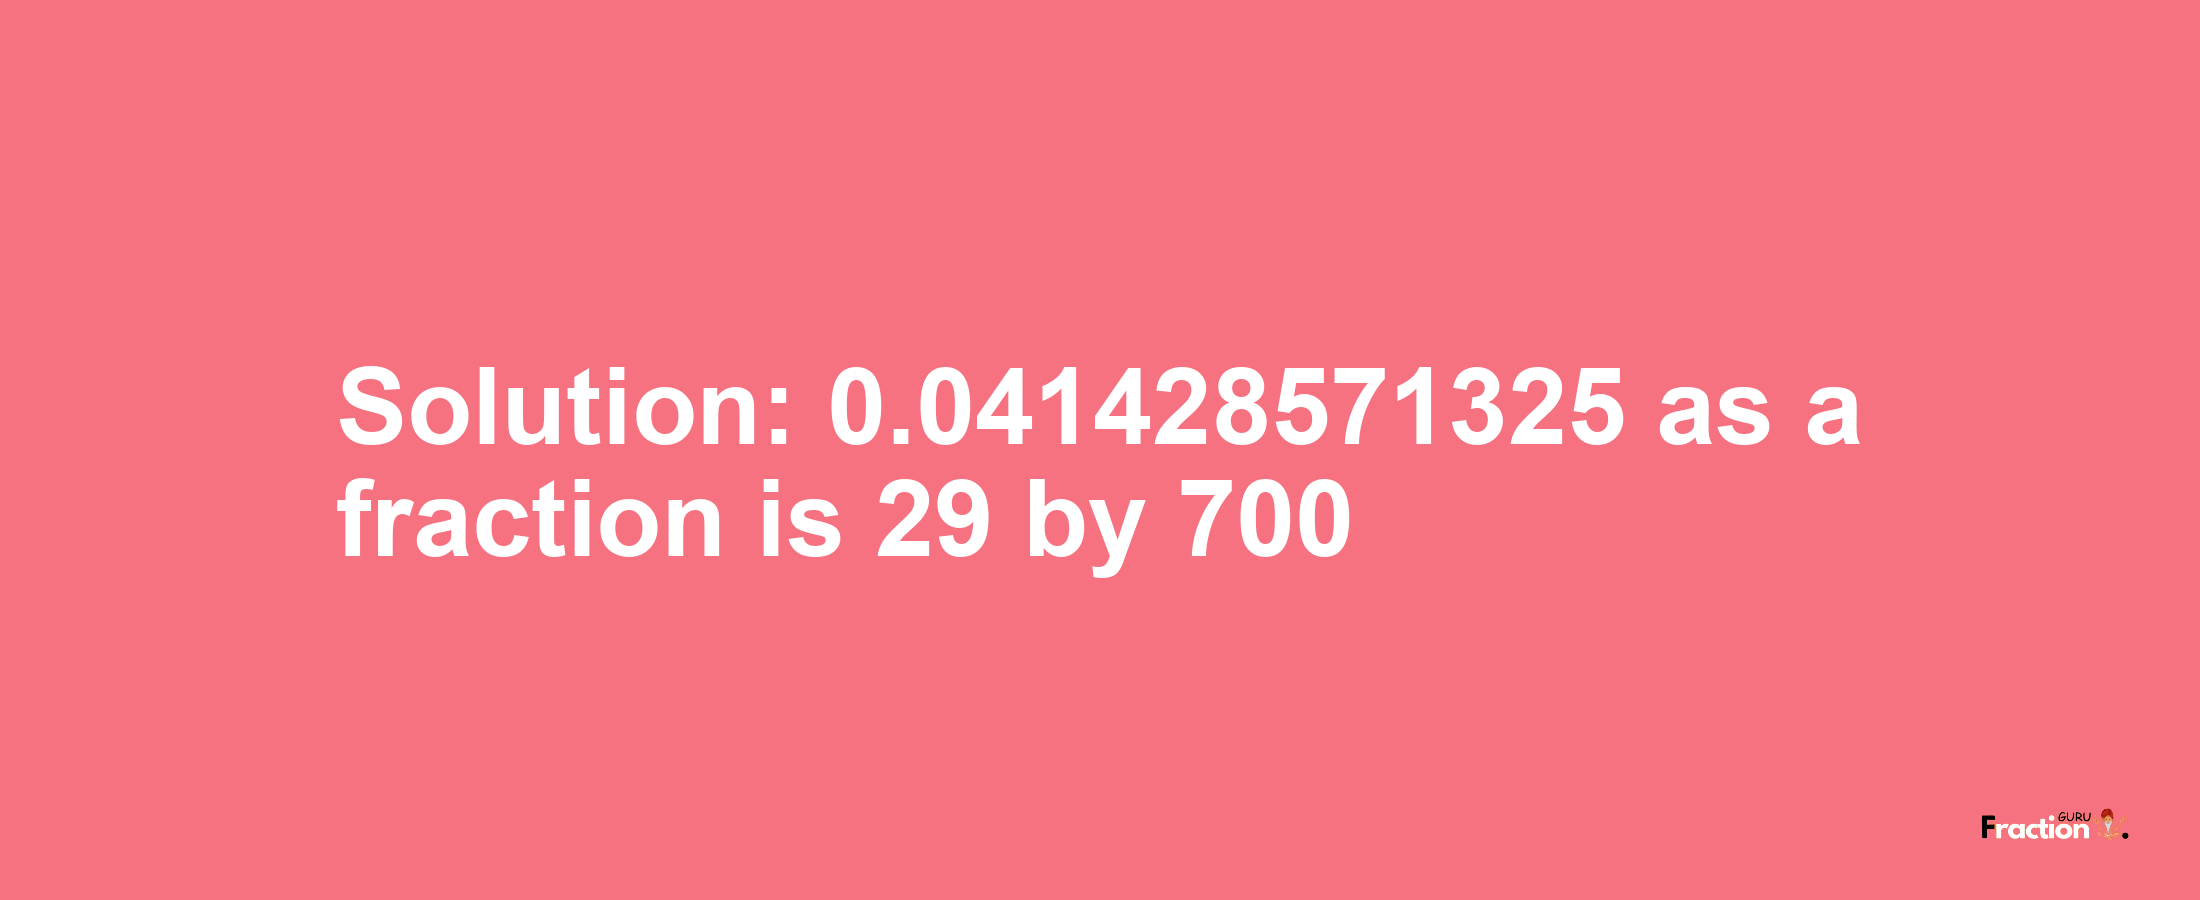 Solution:0.041428571325 as a fraction is 29/700